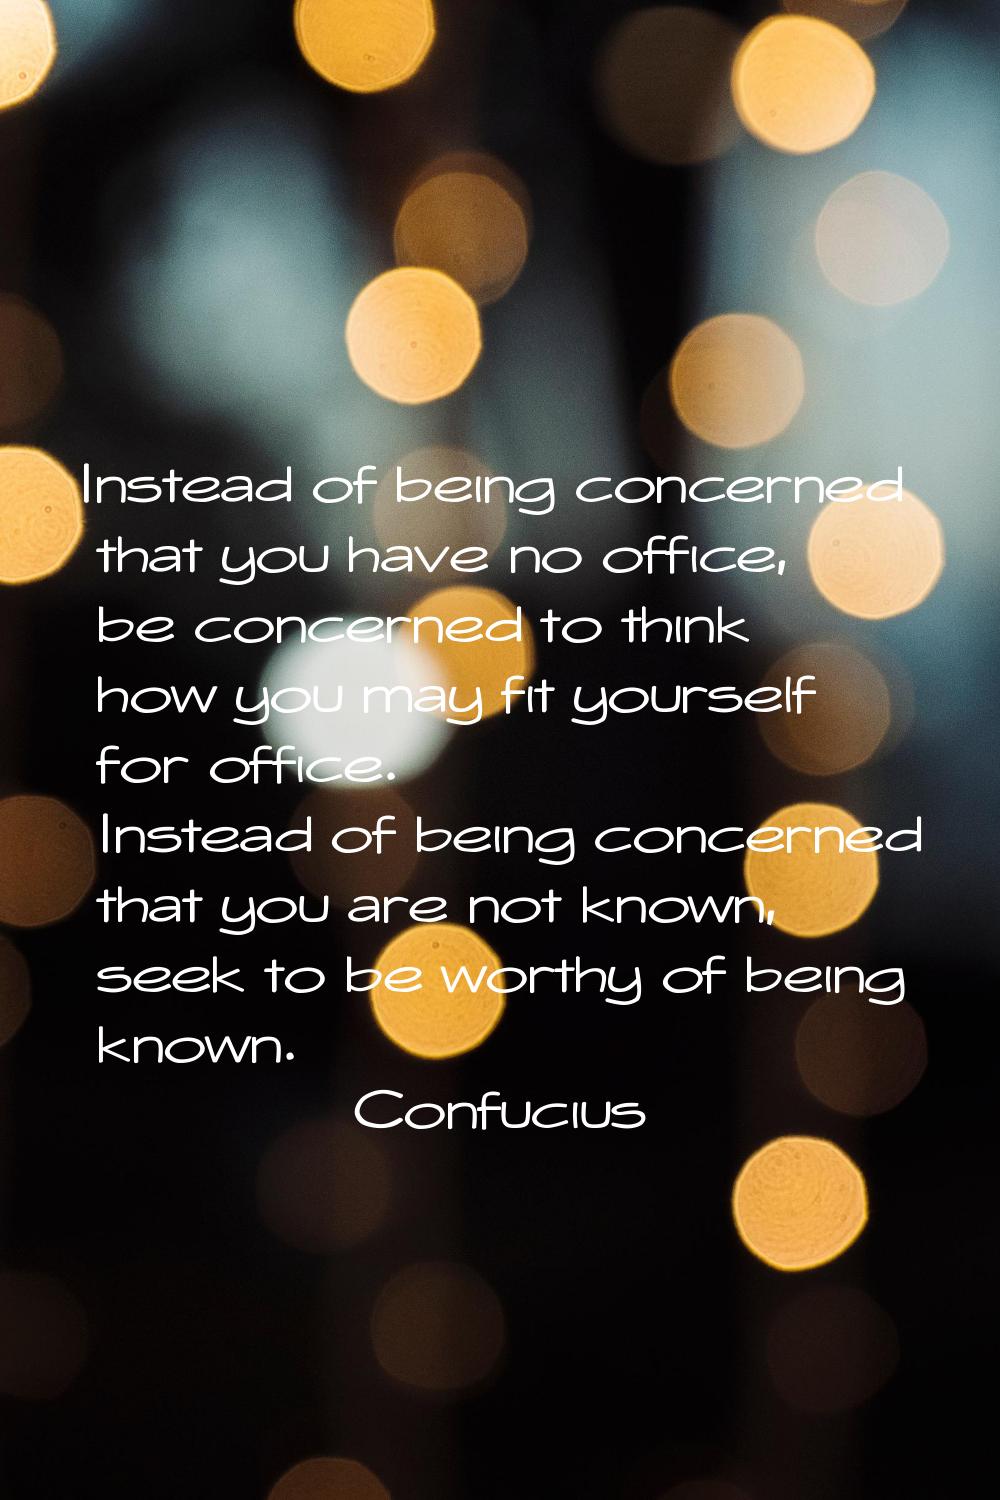 Instead of being concerned that you have no office, be concerned to think how you may fit yourself 